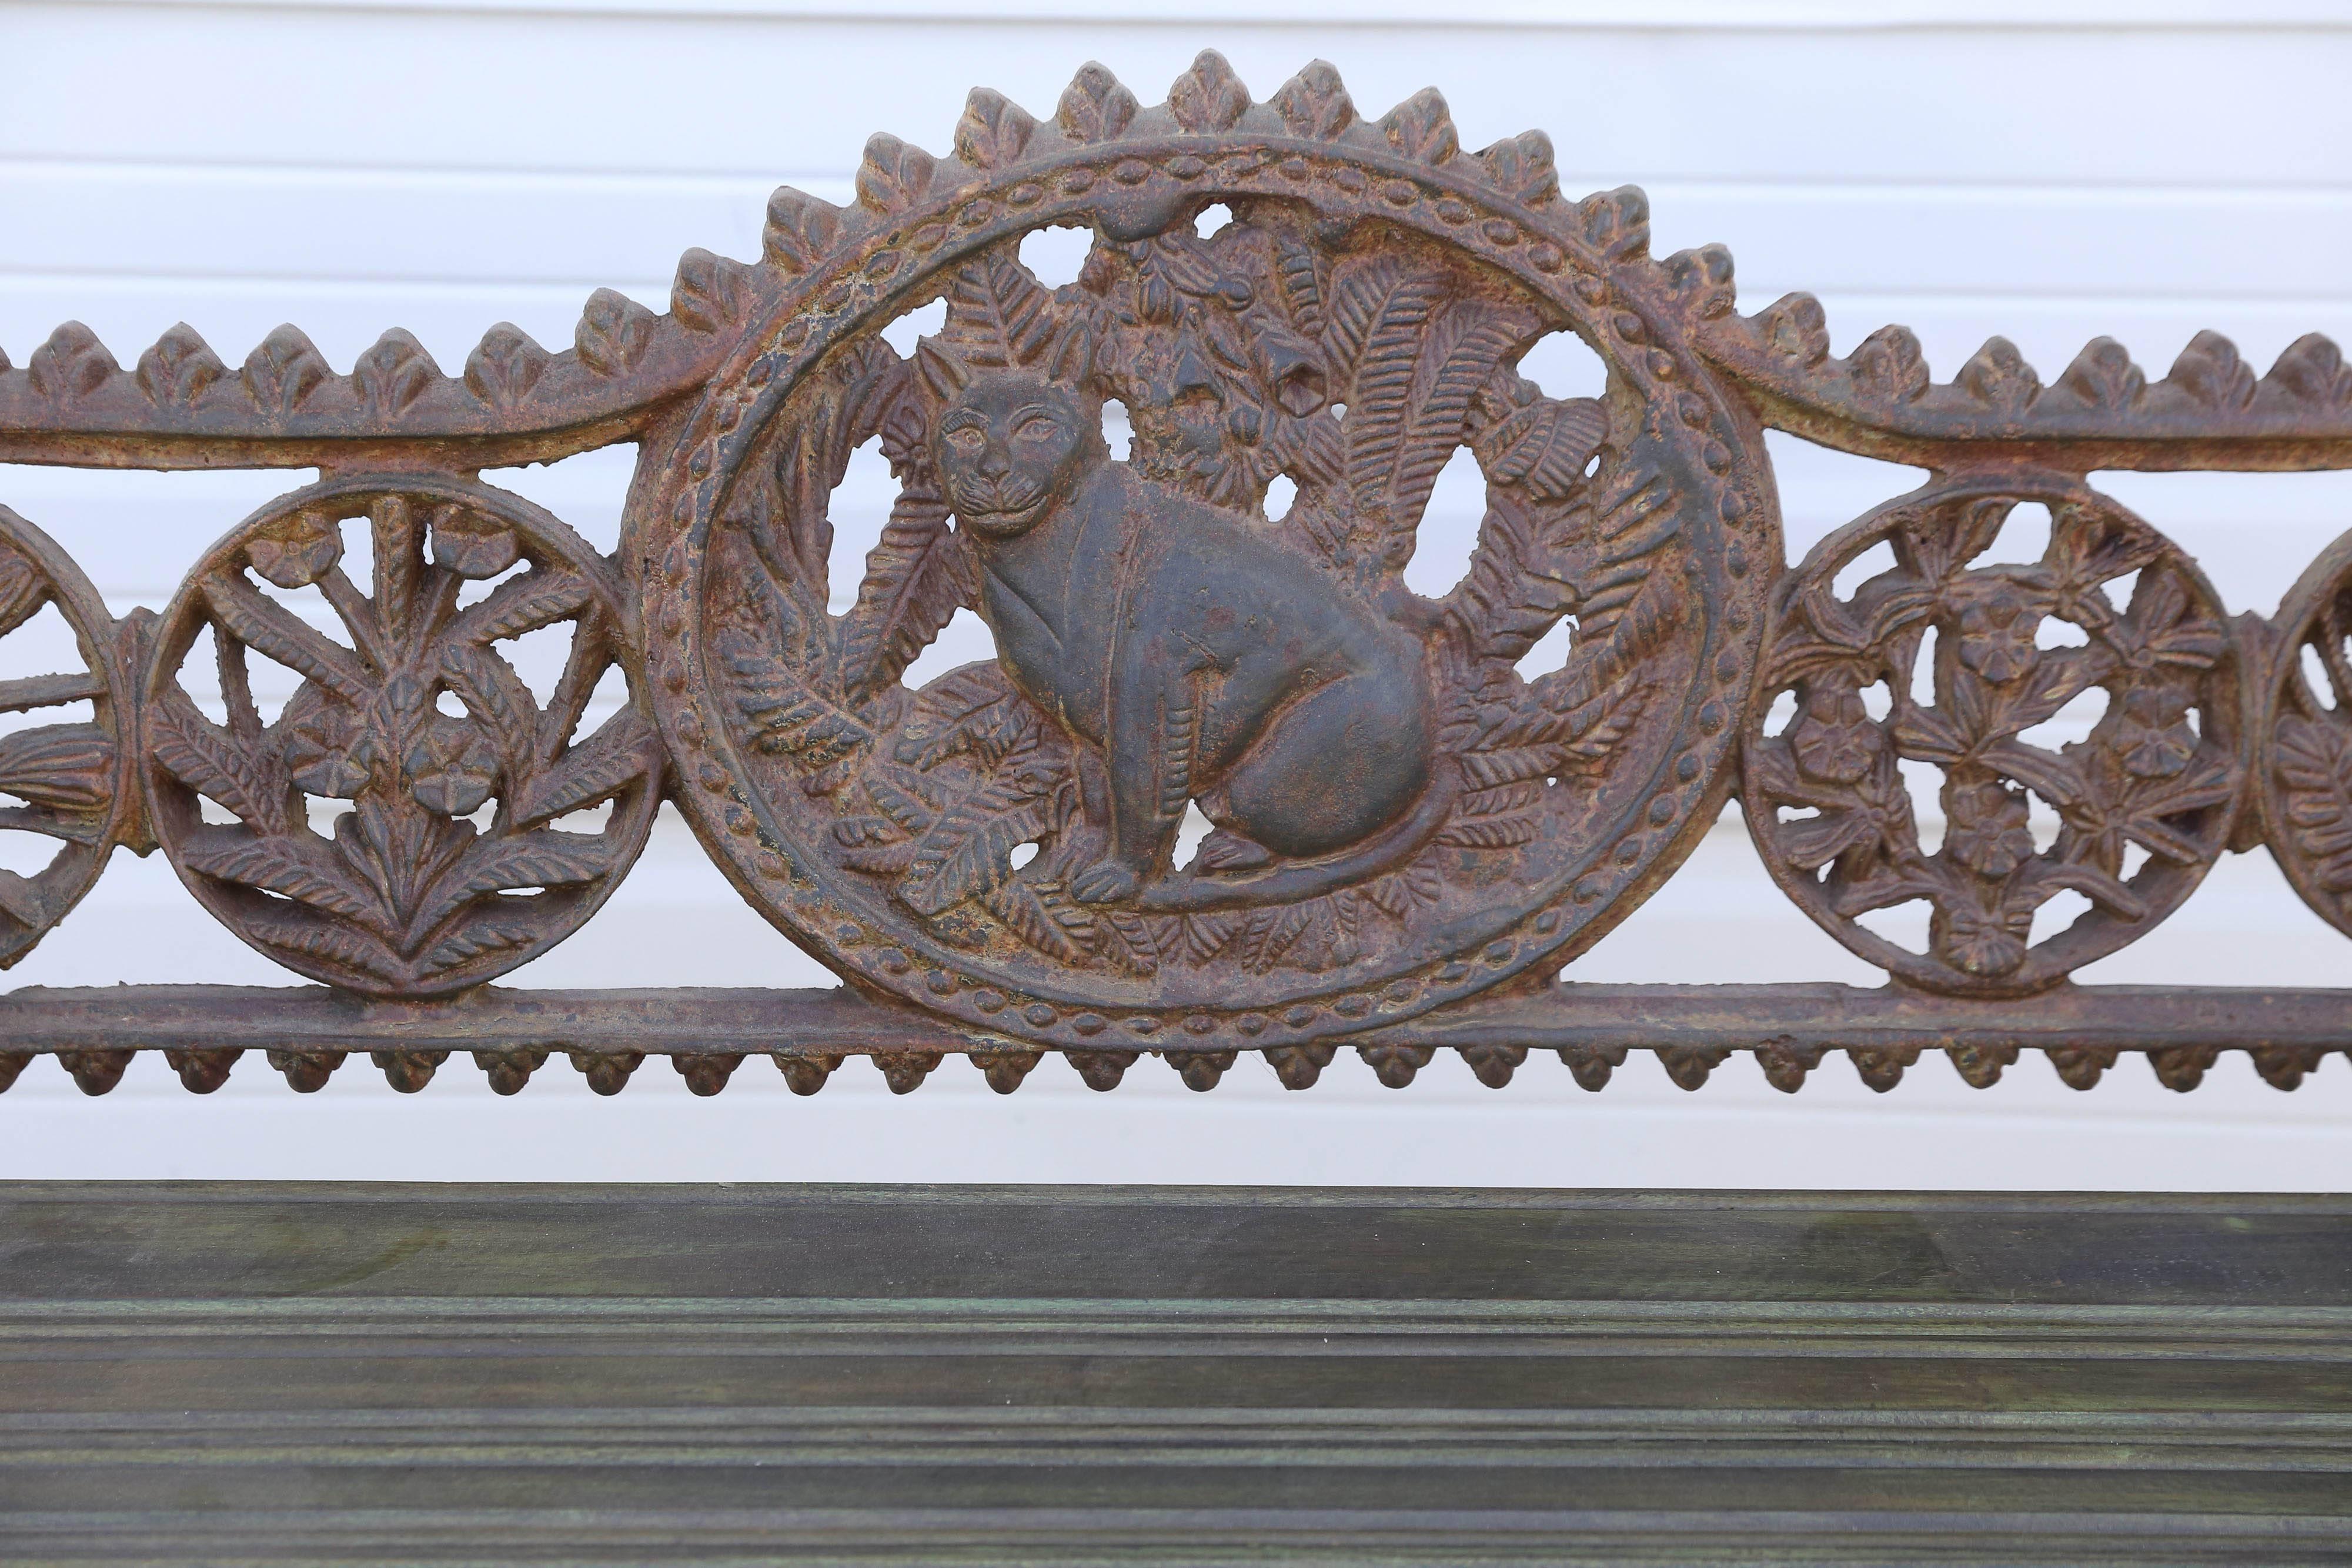 Benches like these were cast in old foundries in Calcutta and were extensively used in colonial rail road stations. The wooden seats would be replaced when the seats were worn out. This one has a cat emblem. These benches can be used in outdoor